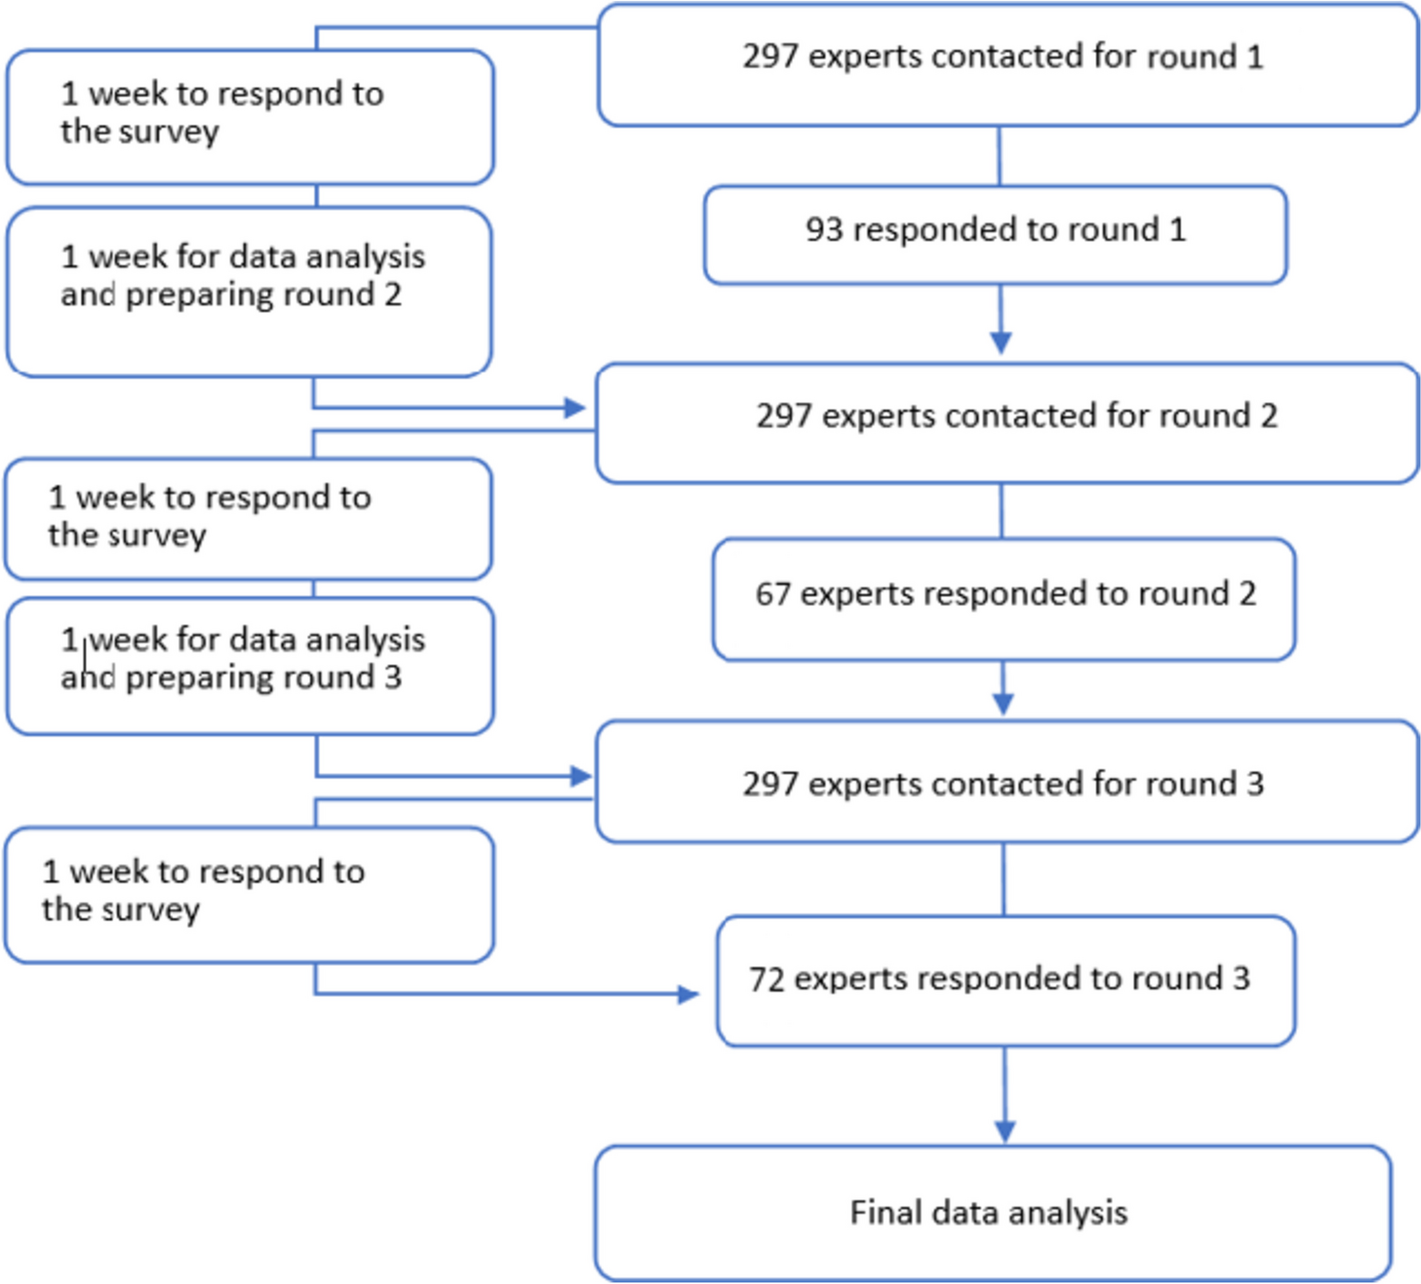 Defining and reporting exercise intensity in interventions for older adults: a modified Delphi process